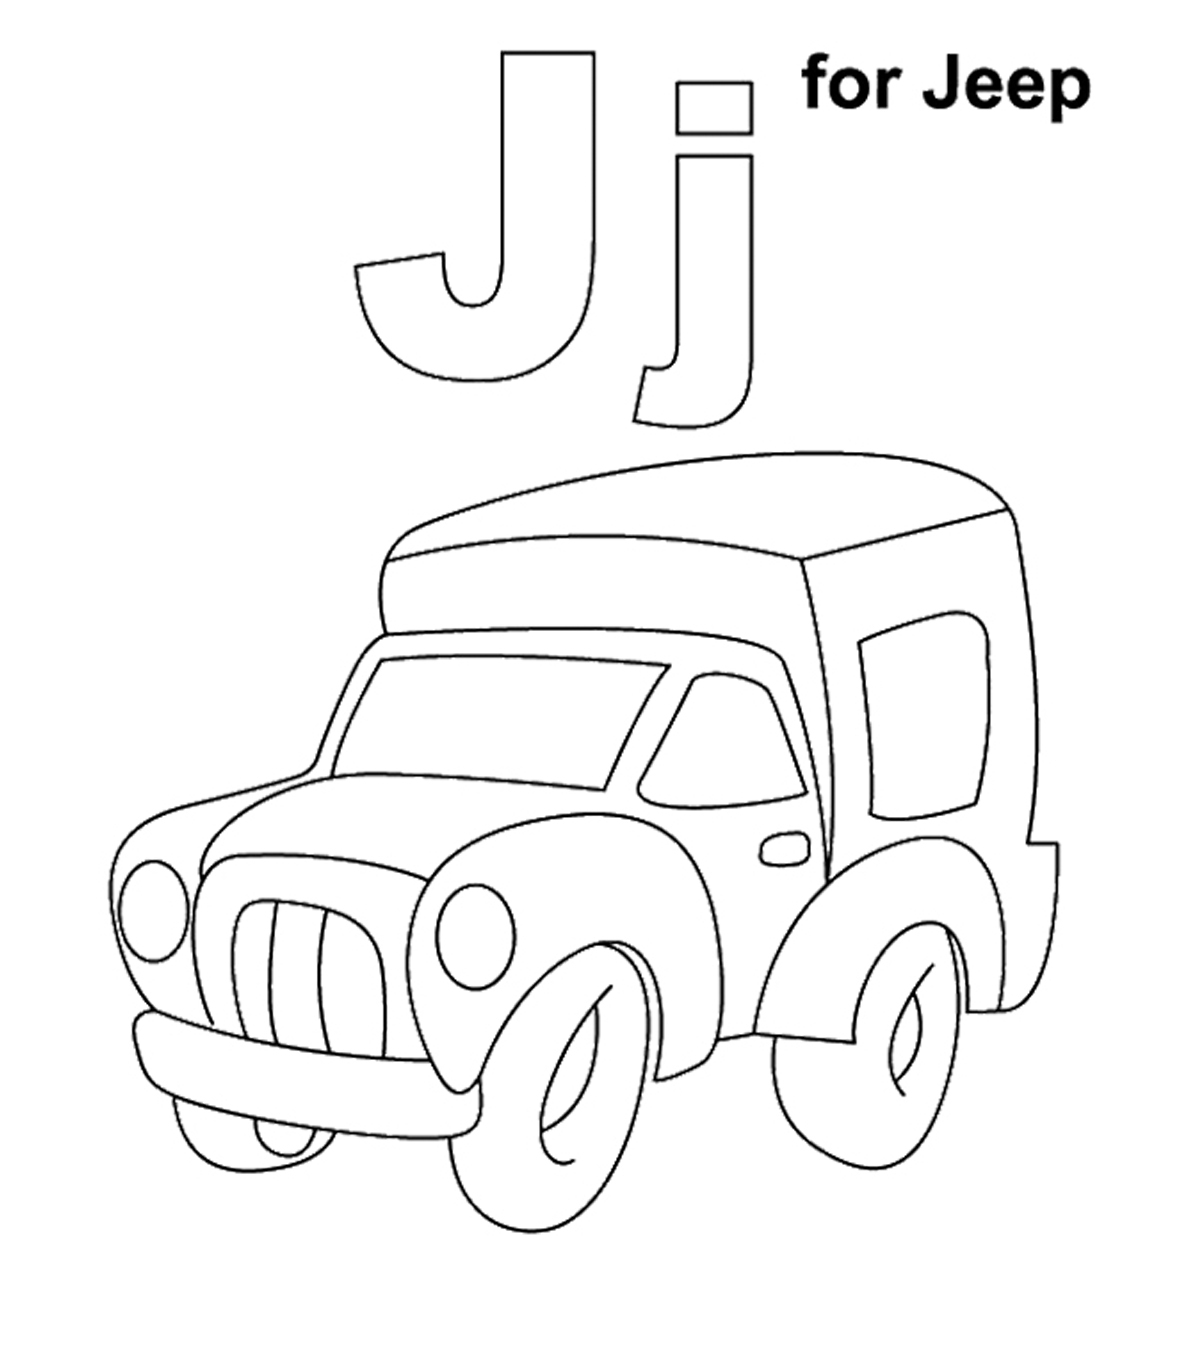 Top 10 Letter ‘J’ Coloring Pages Your Toddler Will Love To Learn & Color_image